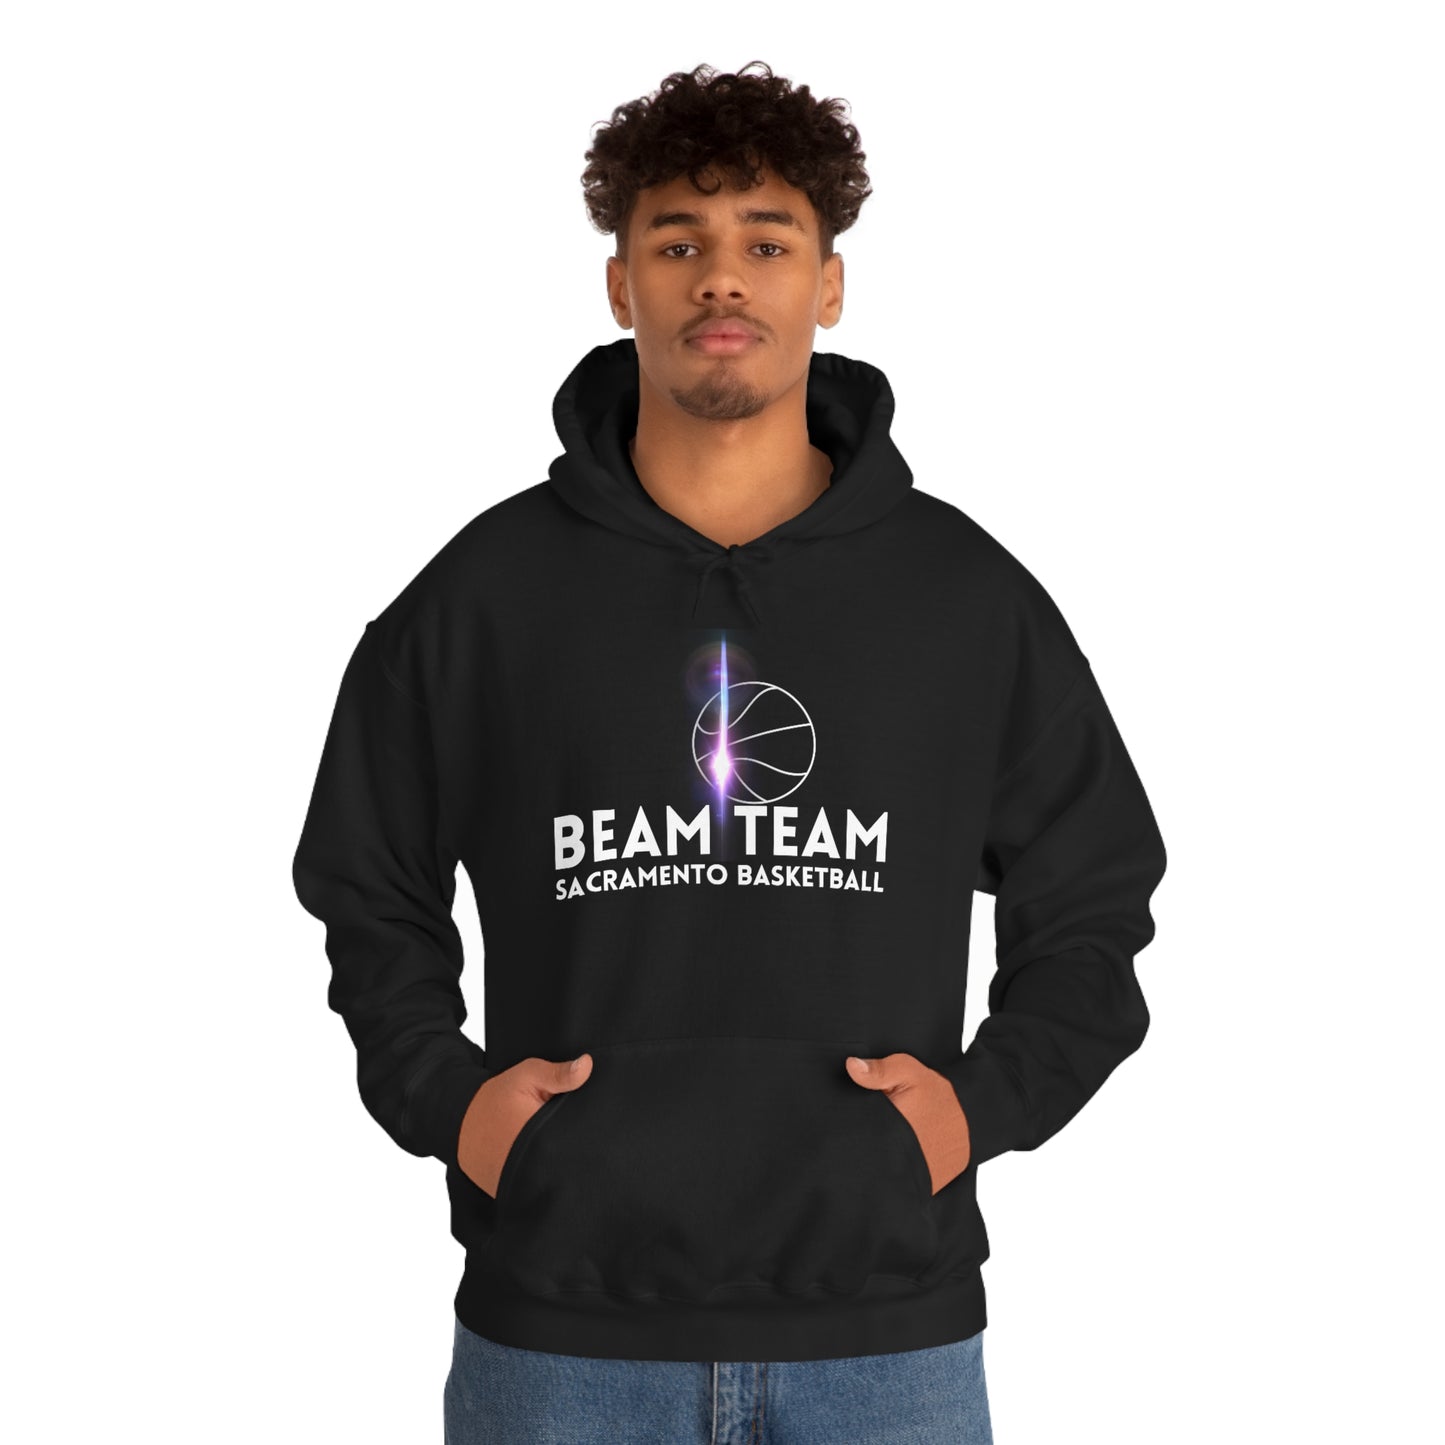 Beam Team, Kings Basketball, Unisex Hoodie Sweatshirt, Sacramento Basketball, Kings Team Gift, Sacramento Basketball Team Gift,Beam Team - Light the Beam! Celebrate another W - WIN - for your Kings Basketball team in this comfortable, cool hoodie. Perfect to keep you warm at the game or the day after another W. It's going to be an epic season for our Sacramento Basketball team - show off your Sac Town pride.